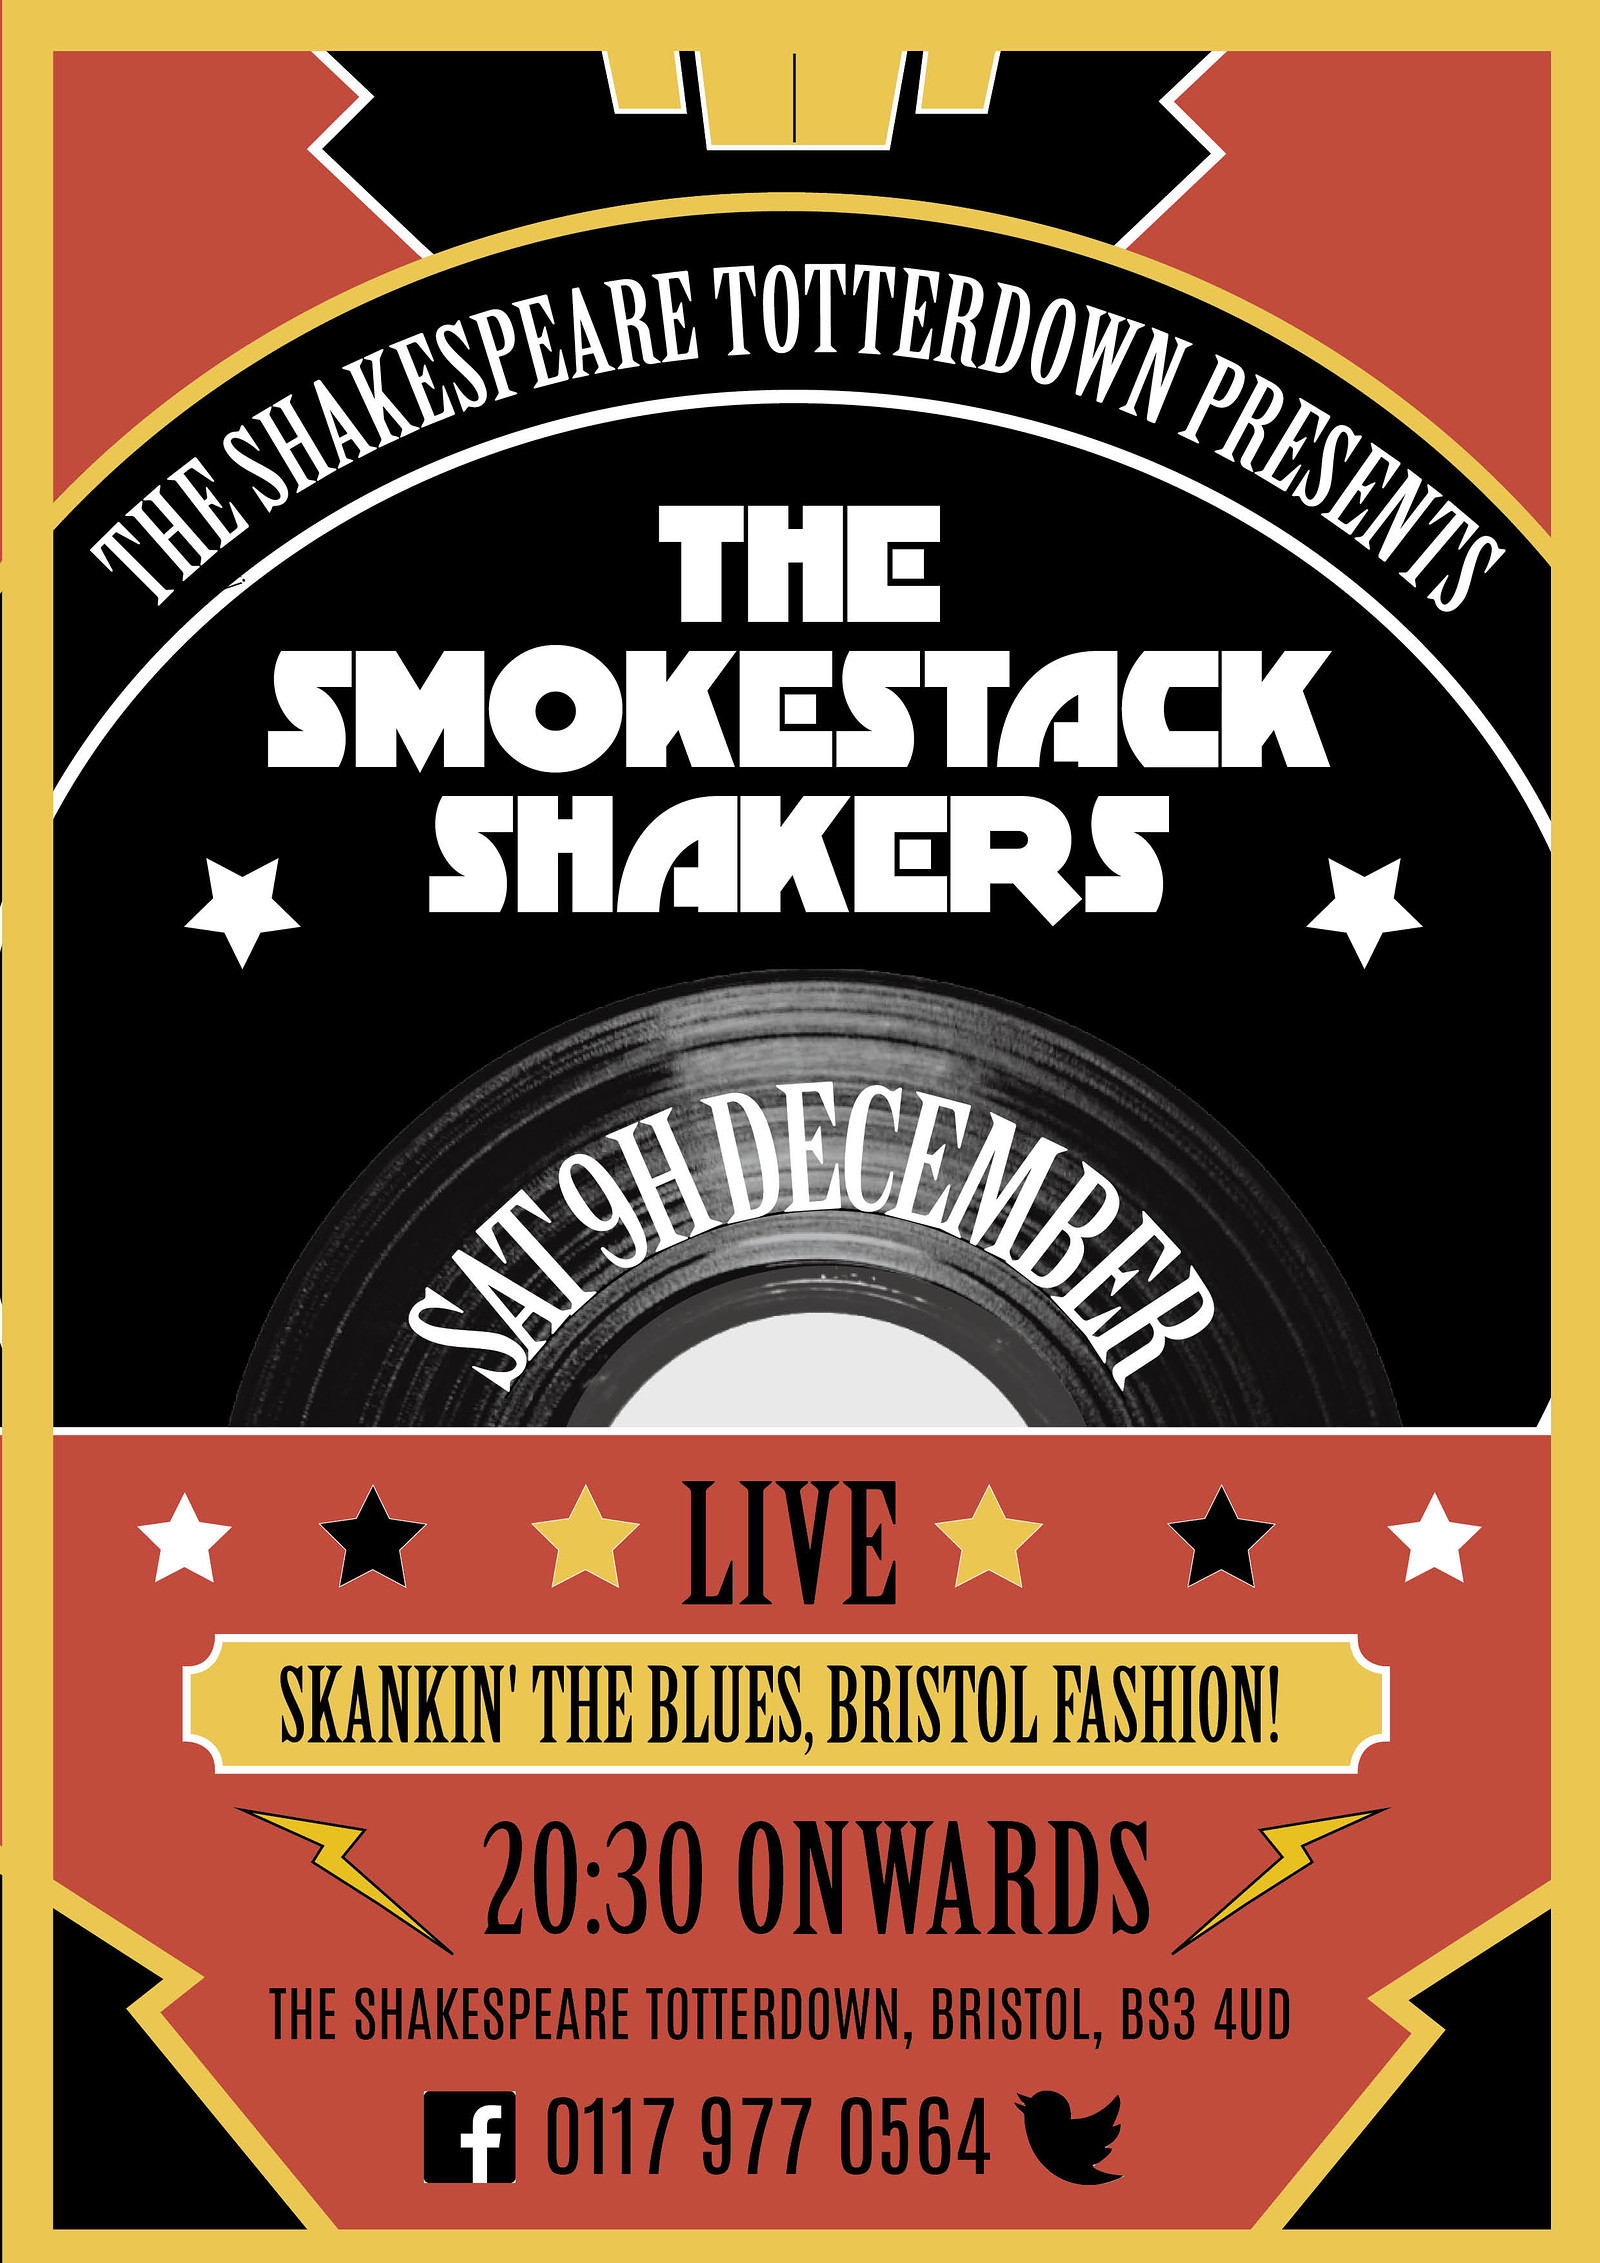 The Smokestack Shakers at the Shakespeare at The Shakespeare Totterdown